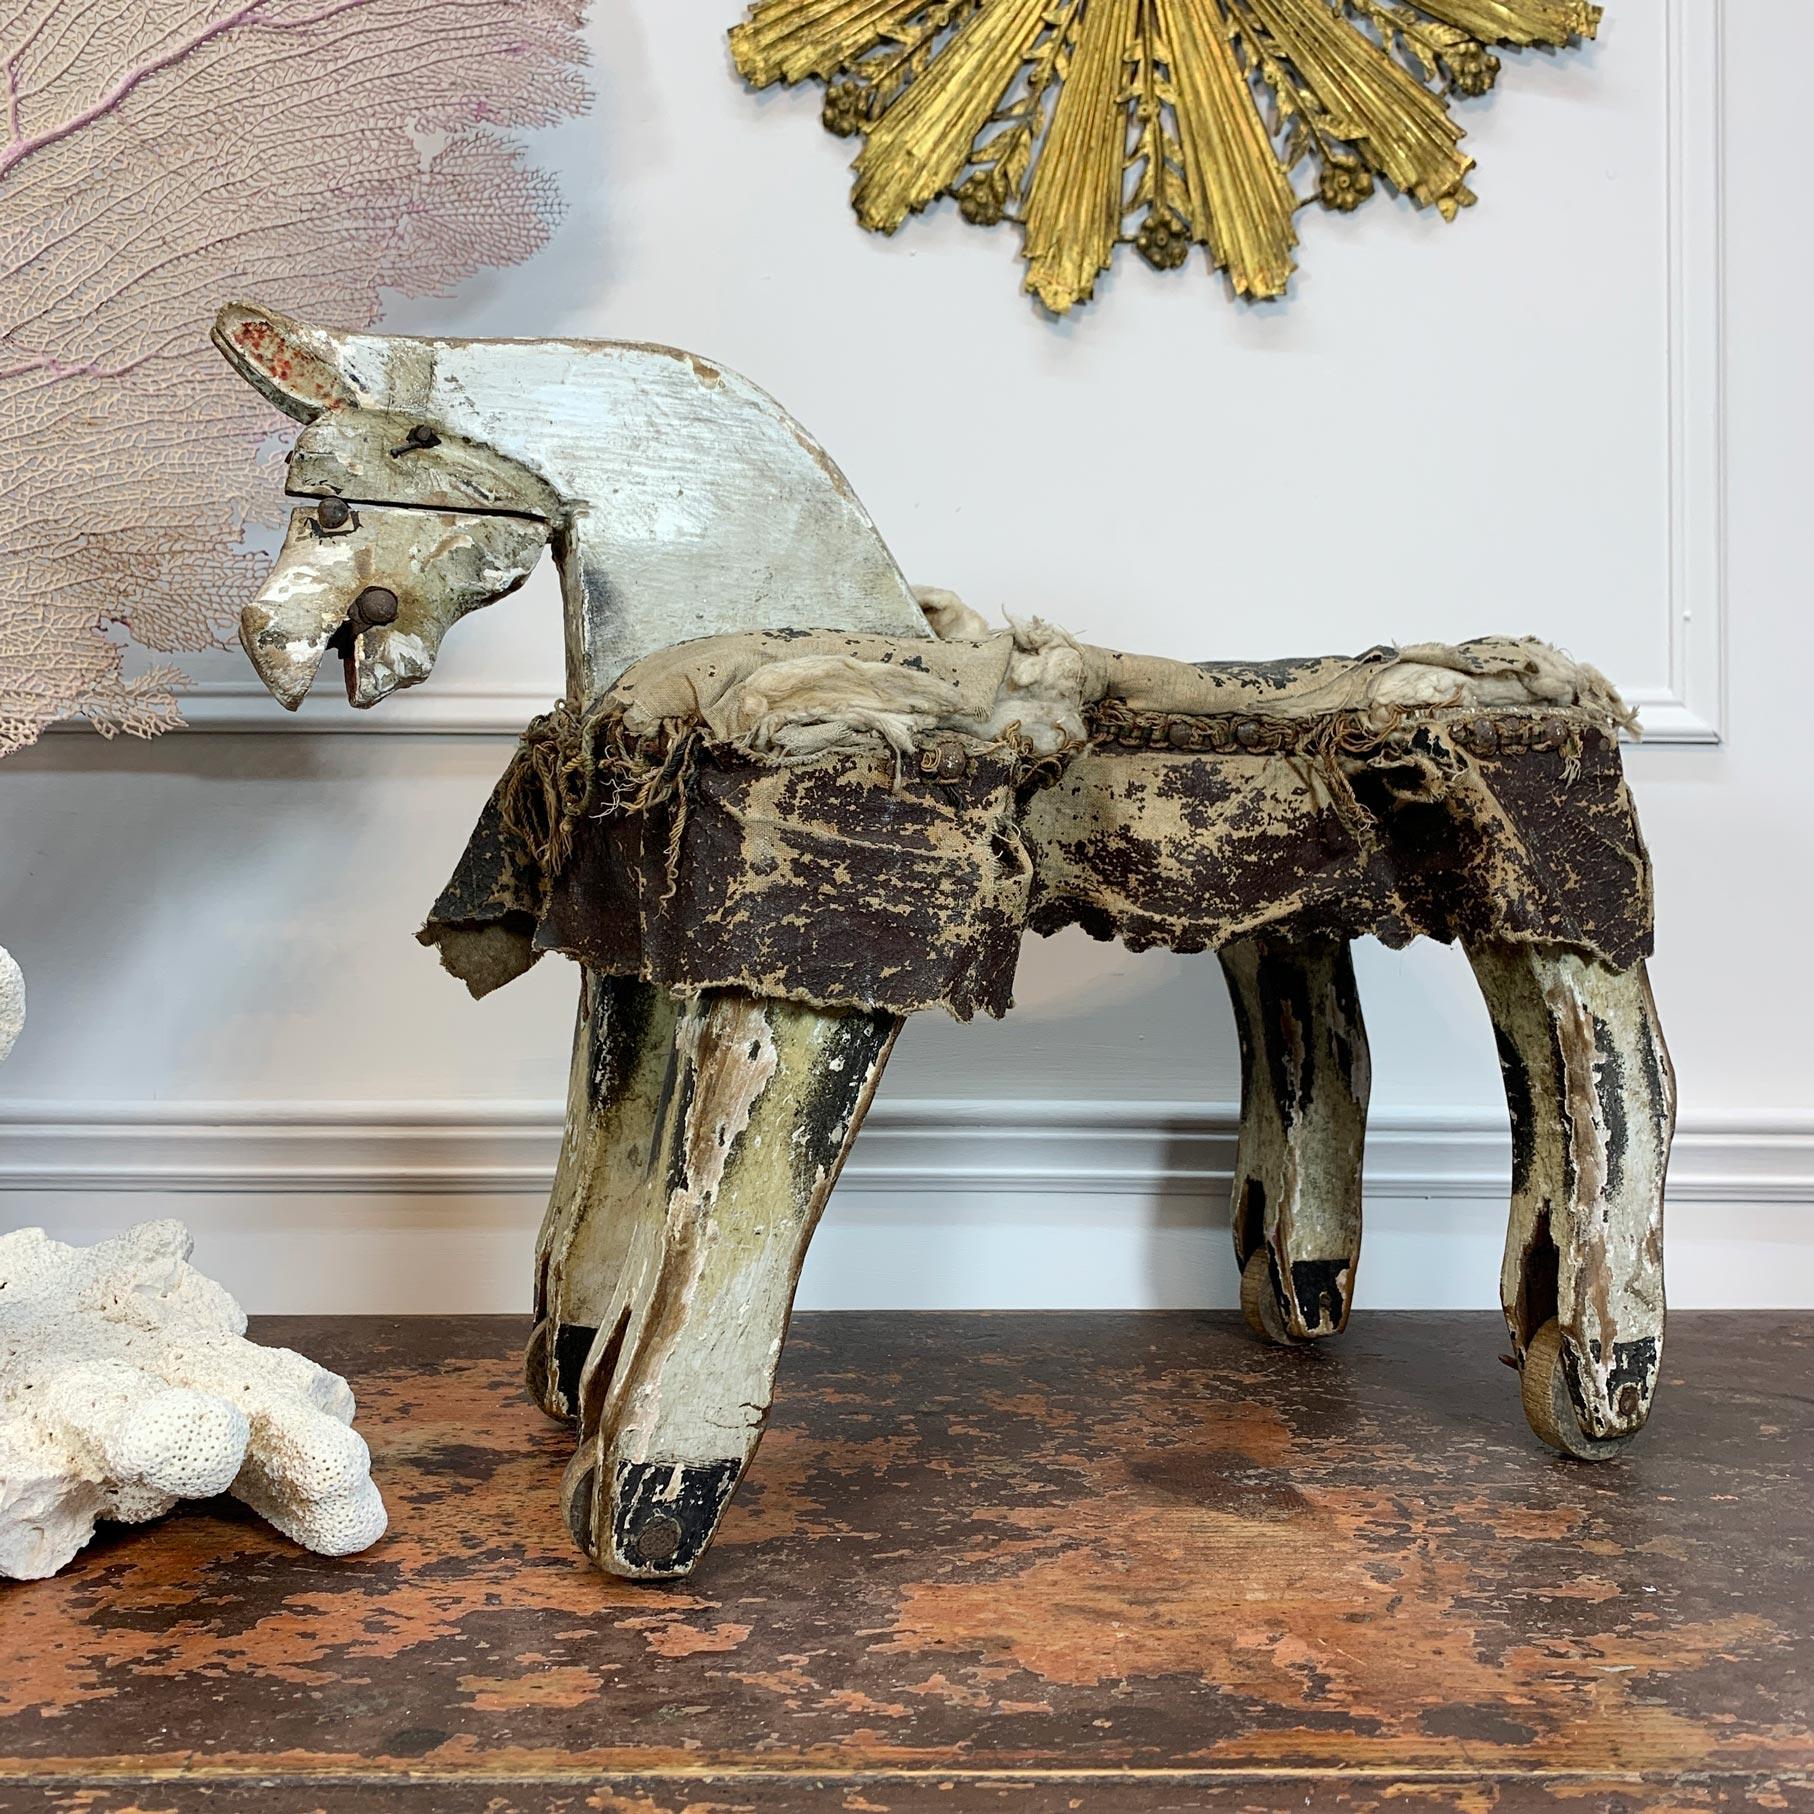 Charming French Folk Art Horse, mounted on naïve wooden wheels with a padded fringed leather saddle and dating to the mid-19thCentury. Superb detailing, this is a well-loved, well used and utterly delightful piece of primitive hand-crafted folk art.